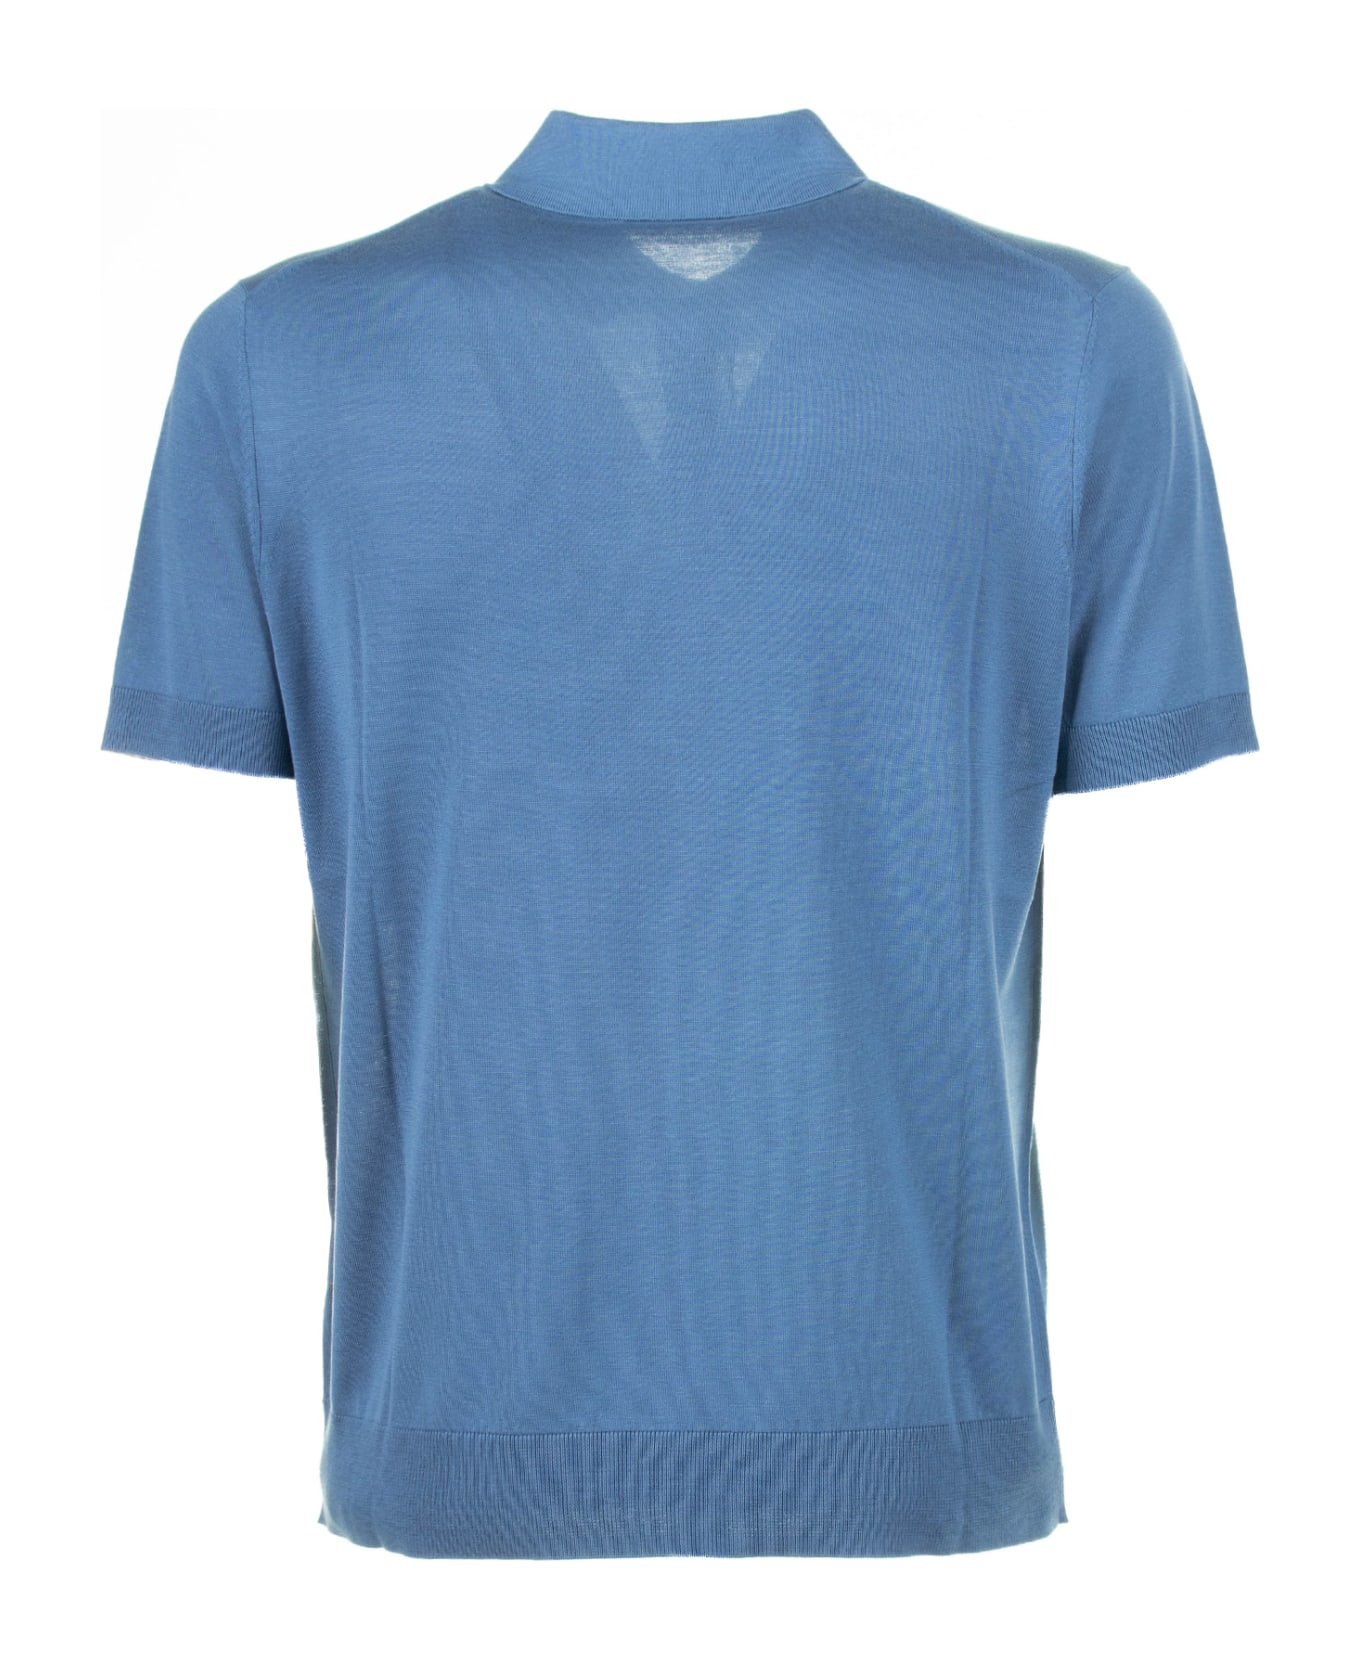 Paolo Pecora Light Blue Polo Shirt With Short Sleeves - AZZURRO ポロシャツ